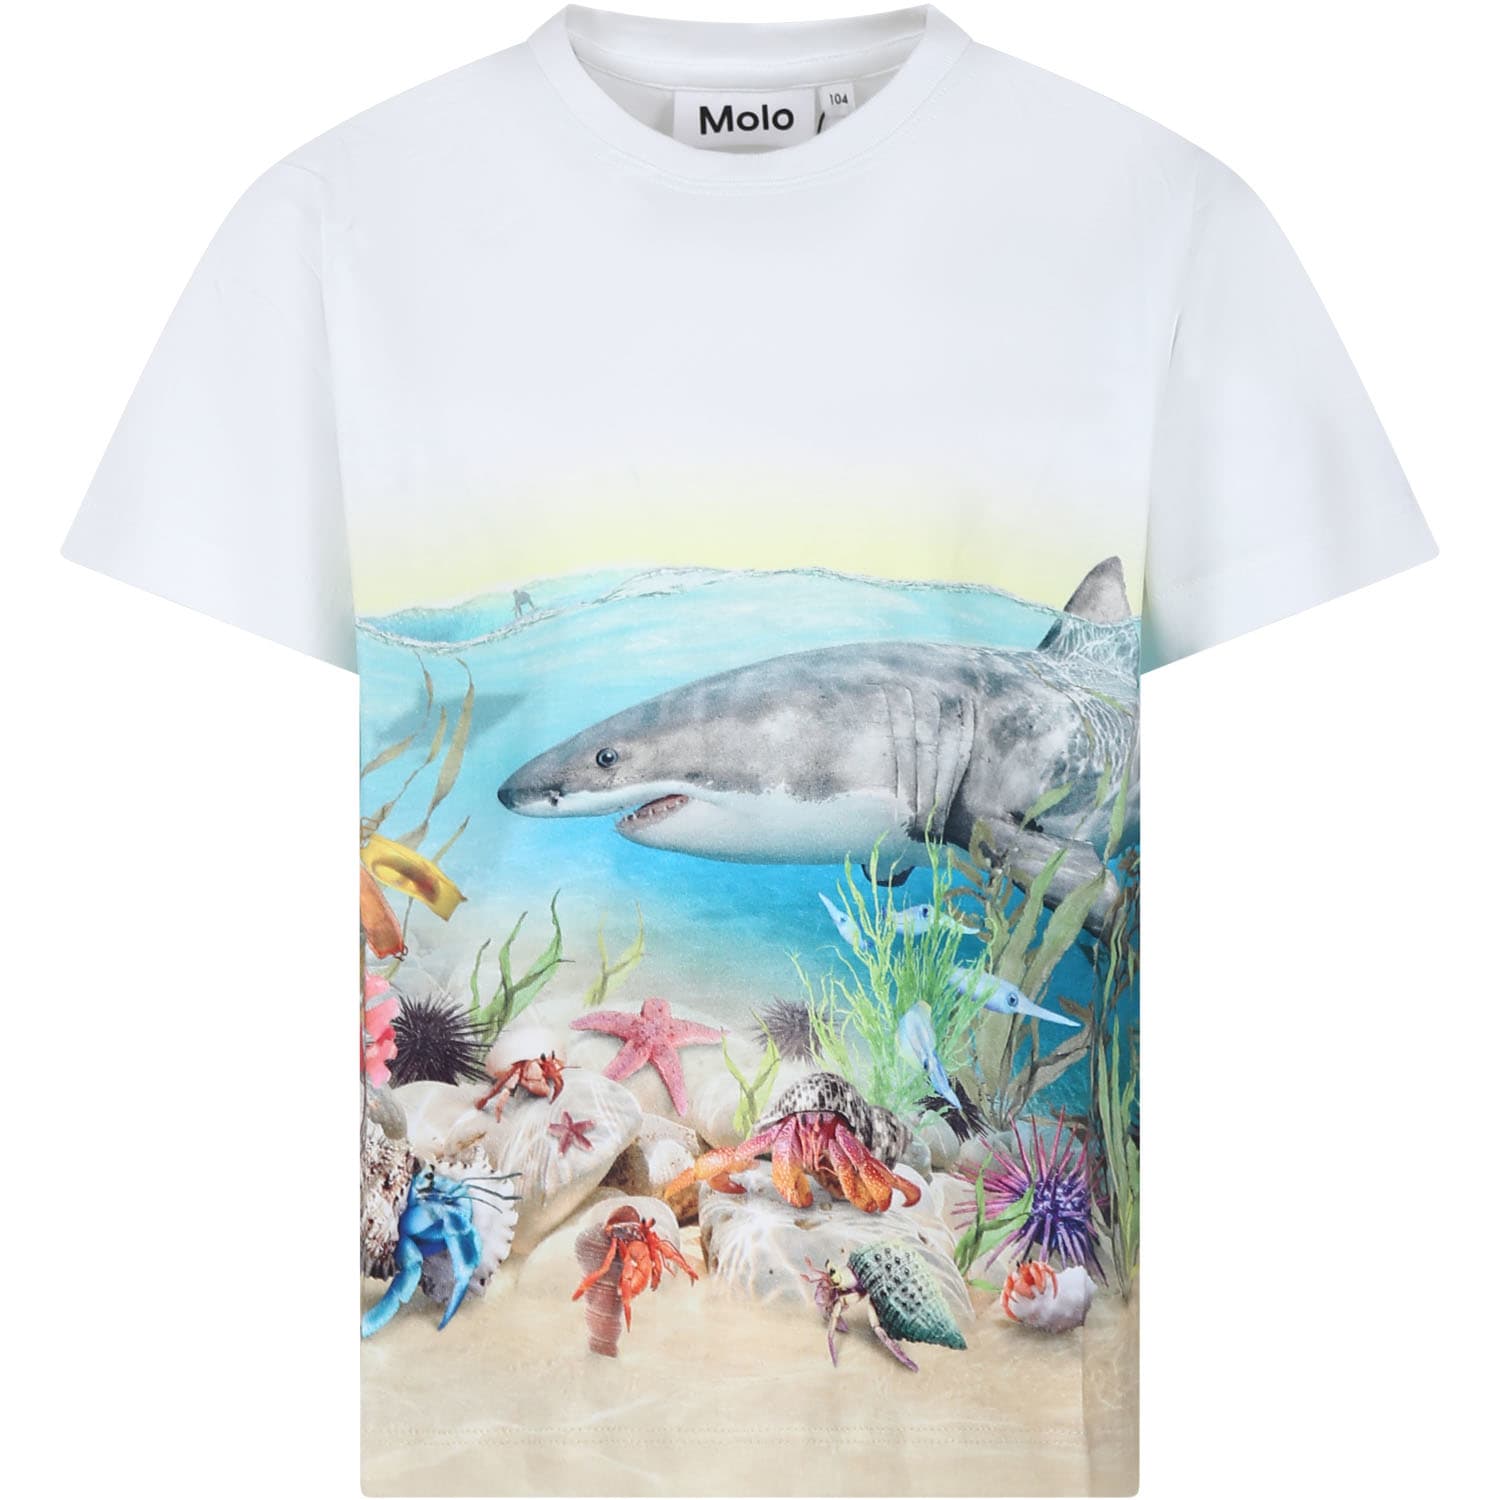 Molo Kids' White T-shirt For Boy With Shark Print